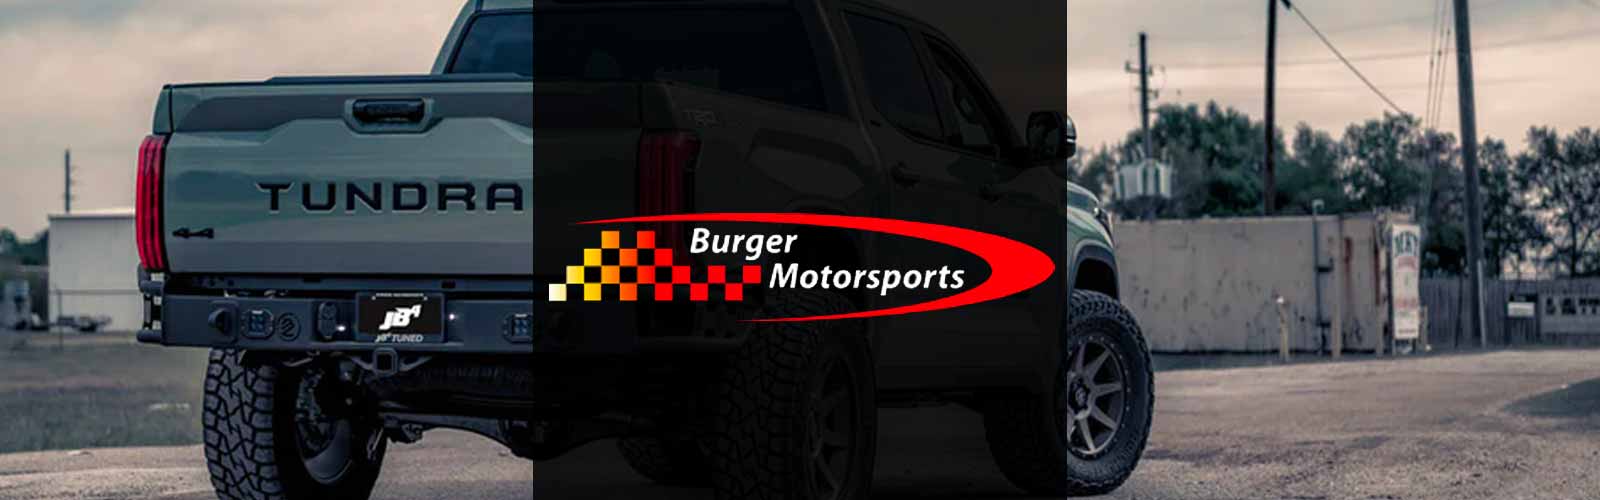 Burger Motorsports JB4 Tuner and Performance Parts for Toyota Cars and Trucks